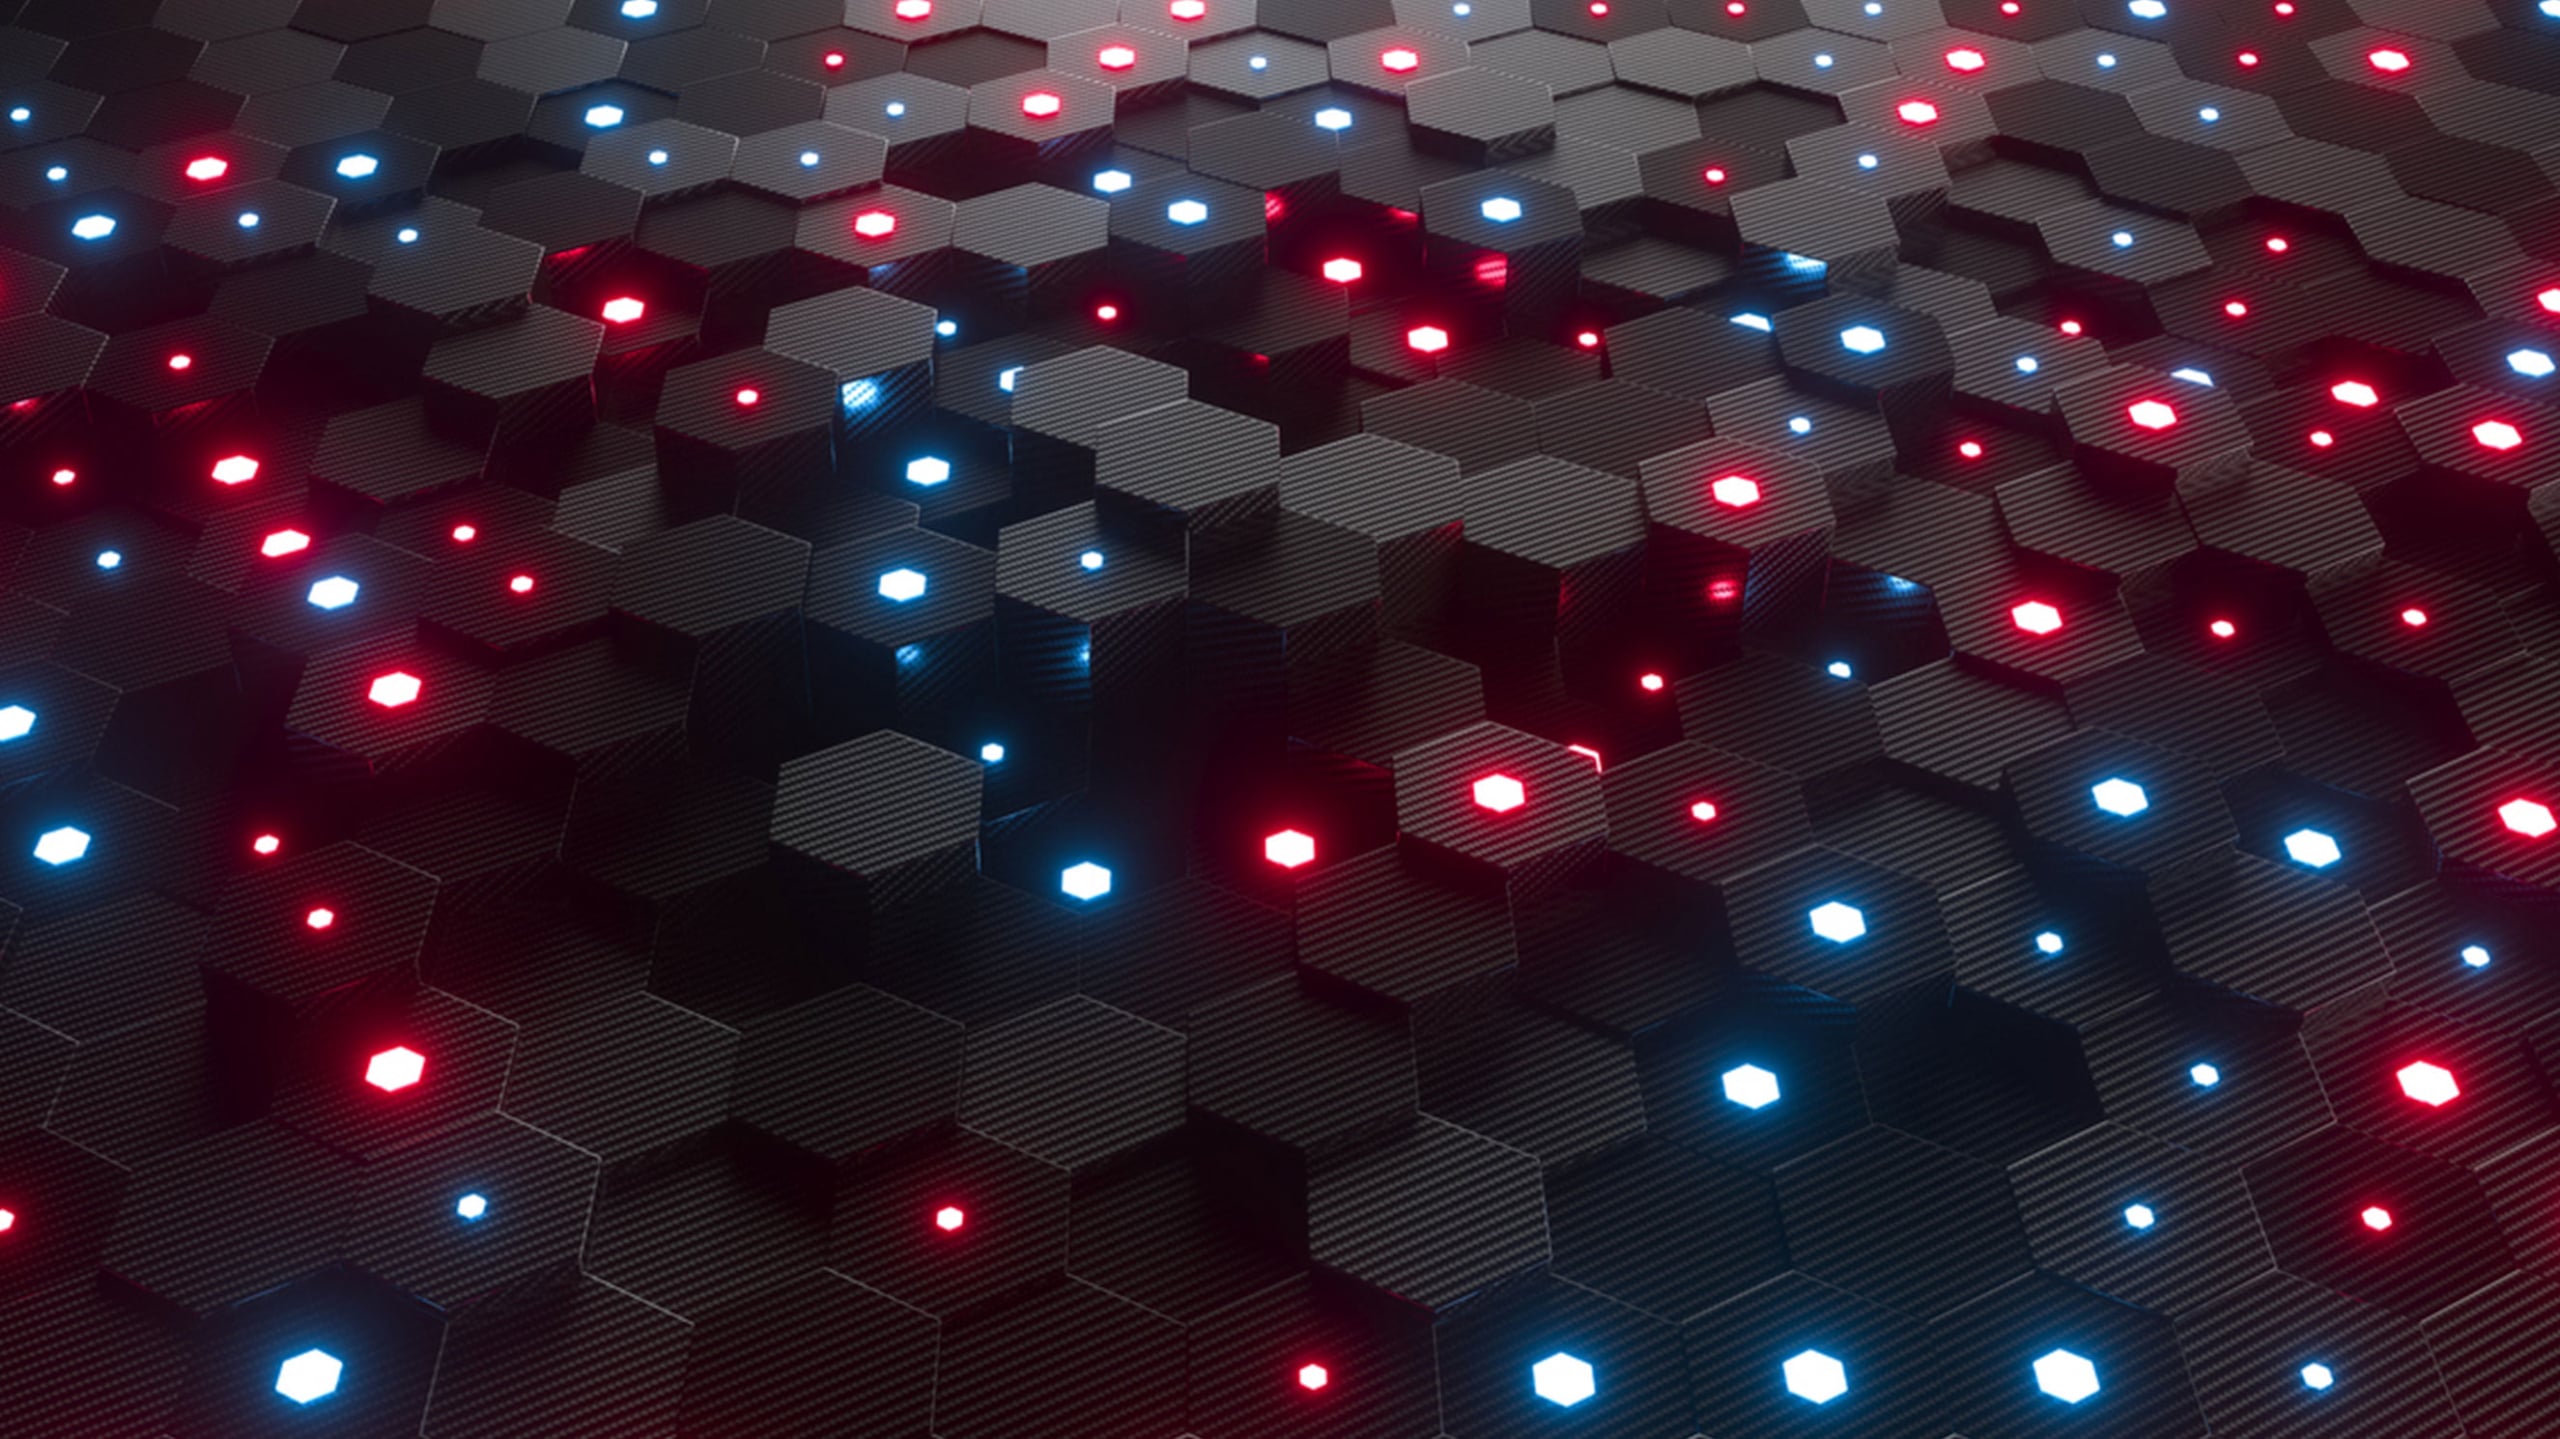 A close-up view of a 3D hexagonal pattern surface illuminated by red and blue LED lights, creating a futuristic, geometric texture that resembles the complexity of IPV4 address space in DNSDB.